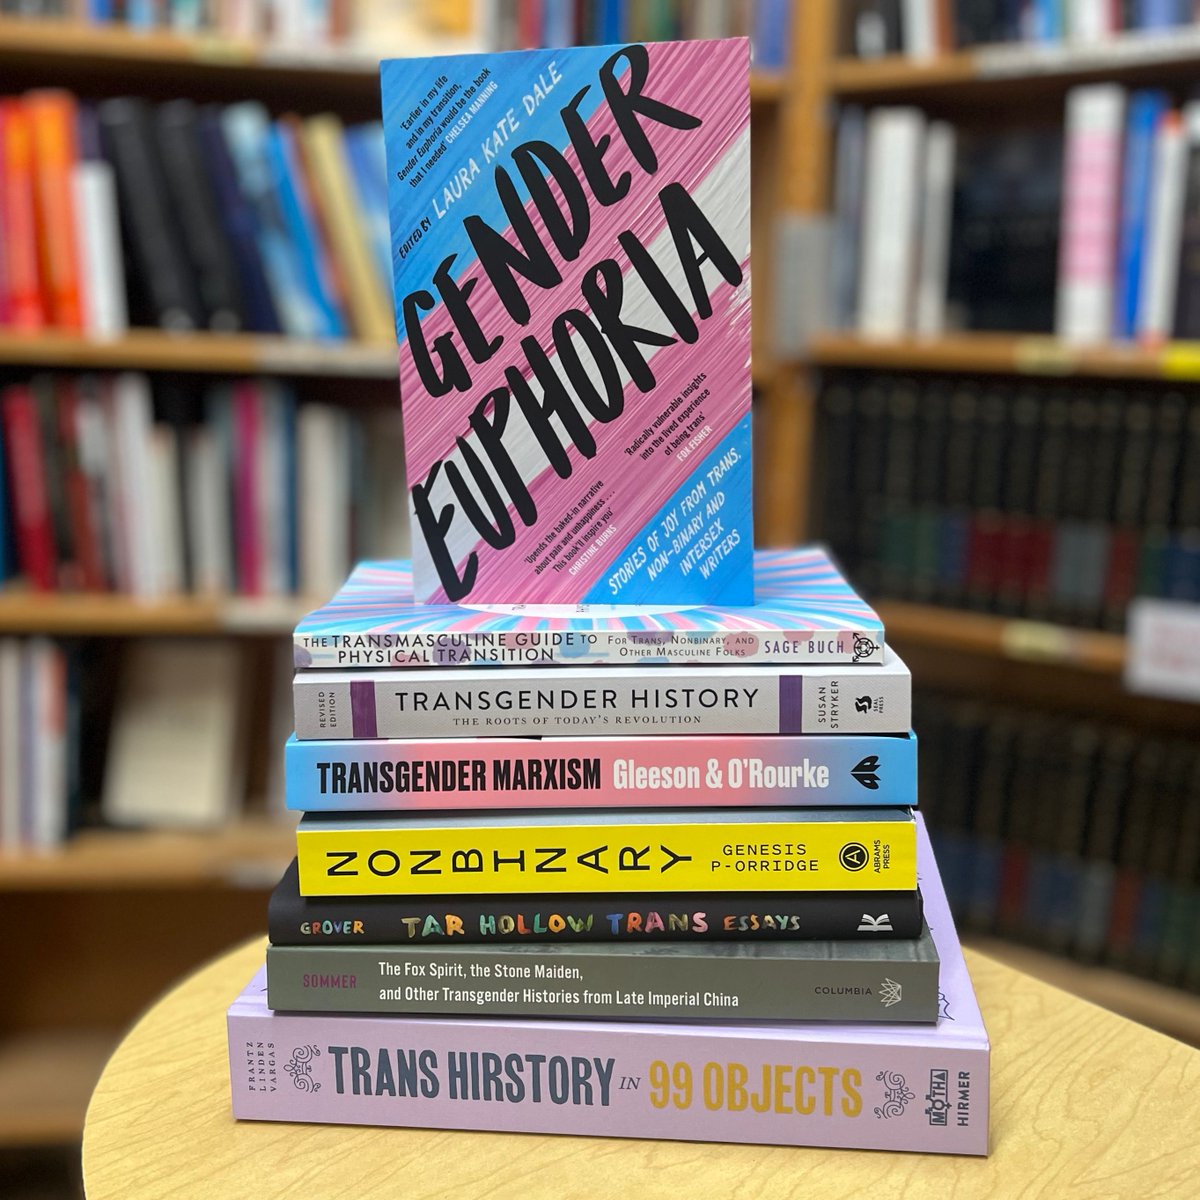 Happy Trans Day of Visibility! We have some great titles in our queer studies section upstairs, come browse! We're open til 9pm tonight 💚